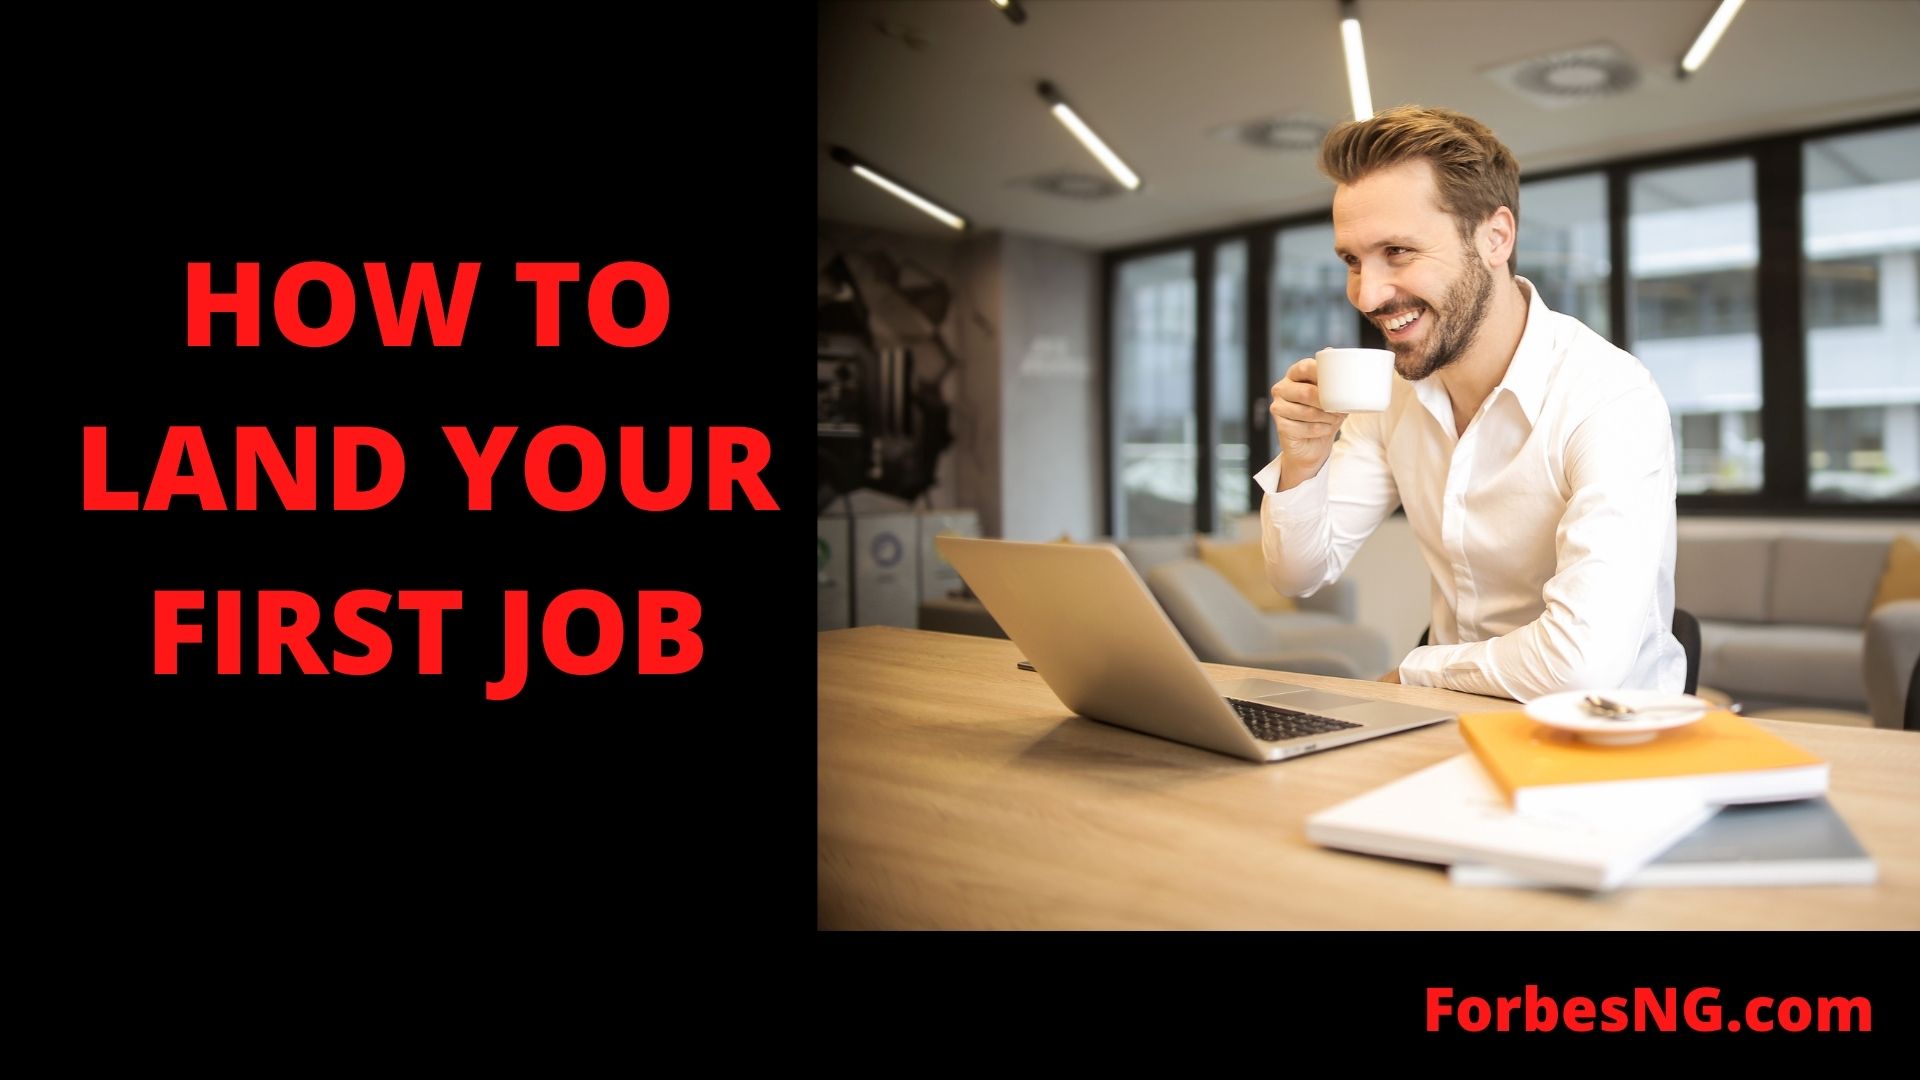 How to Get Your First Job in 12 Easy Steps